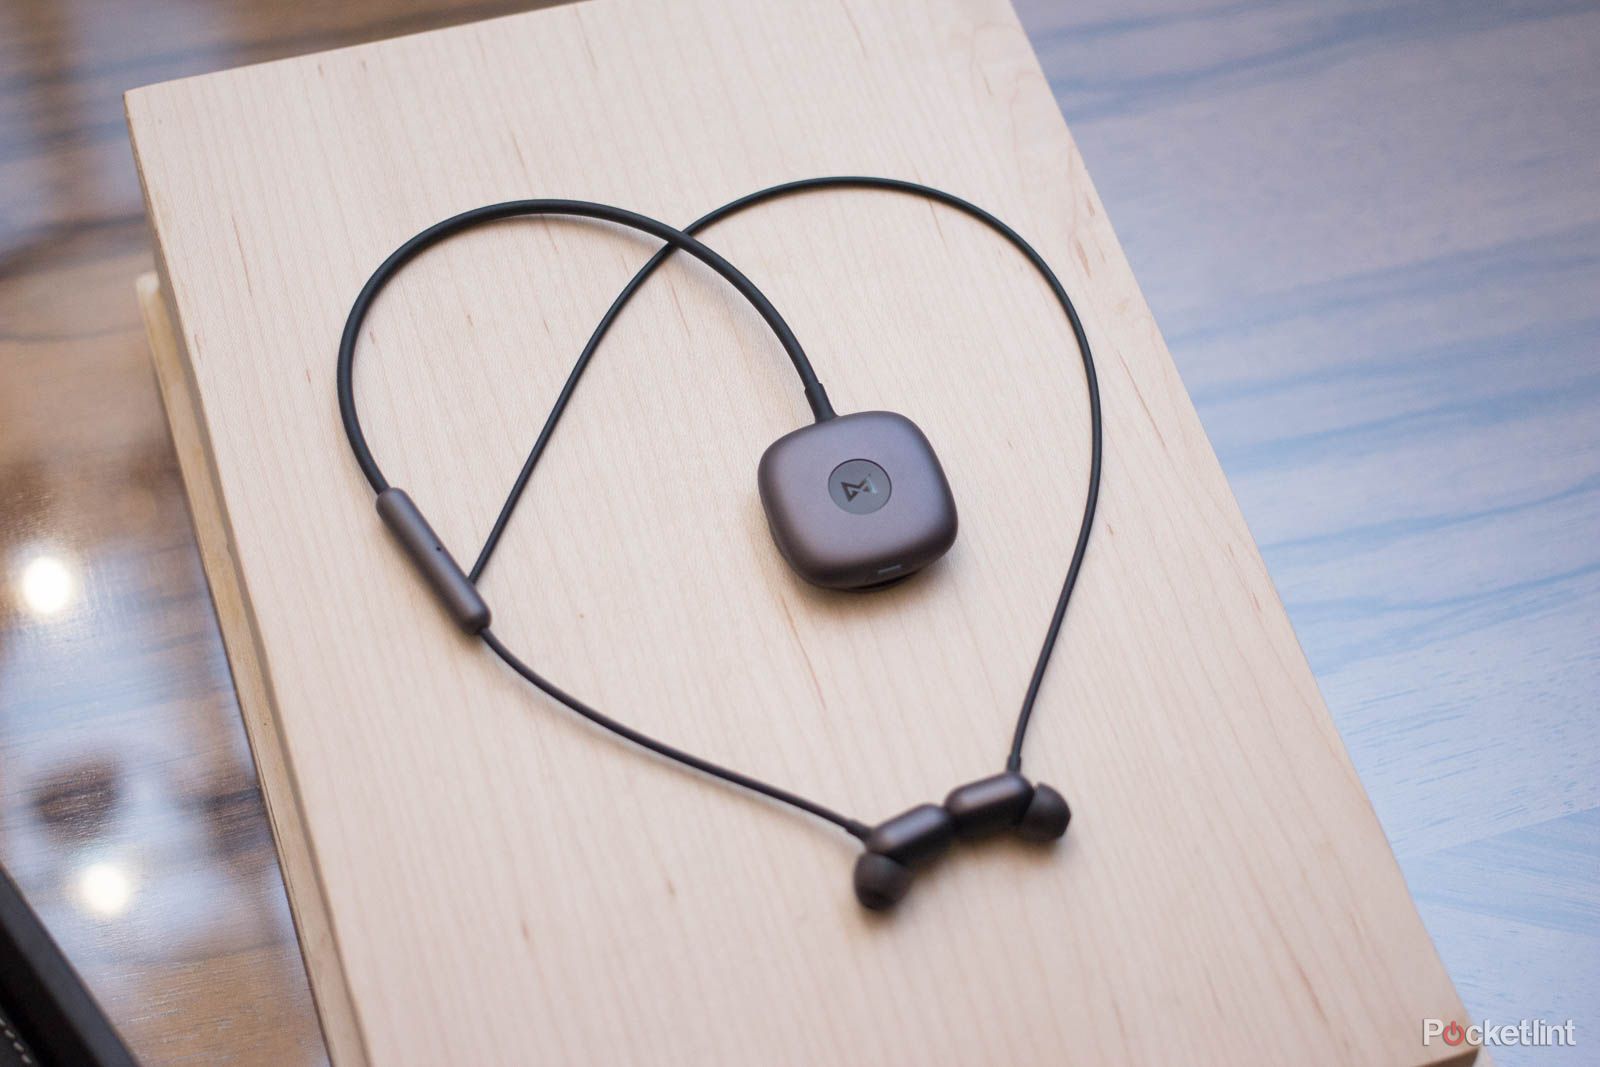 misfit enters audio world with activity tracking wireless earphones specter image 1